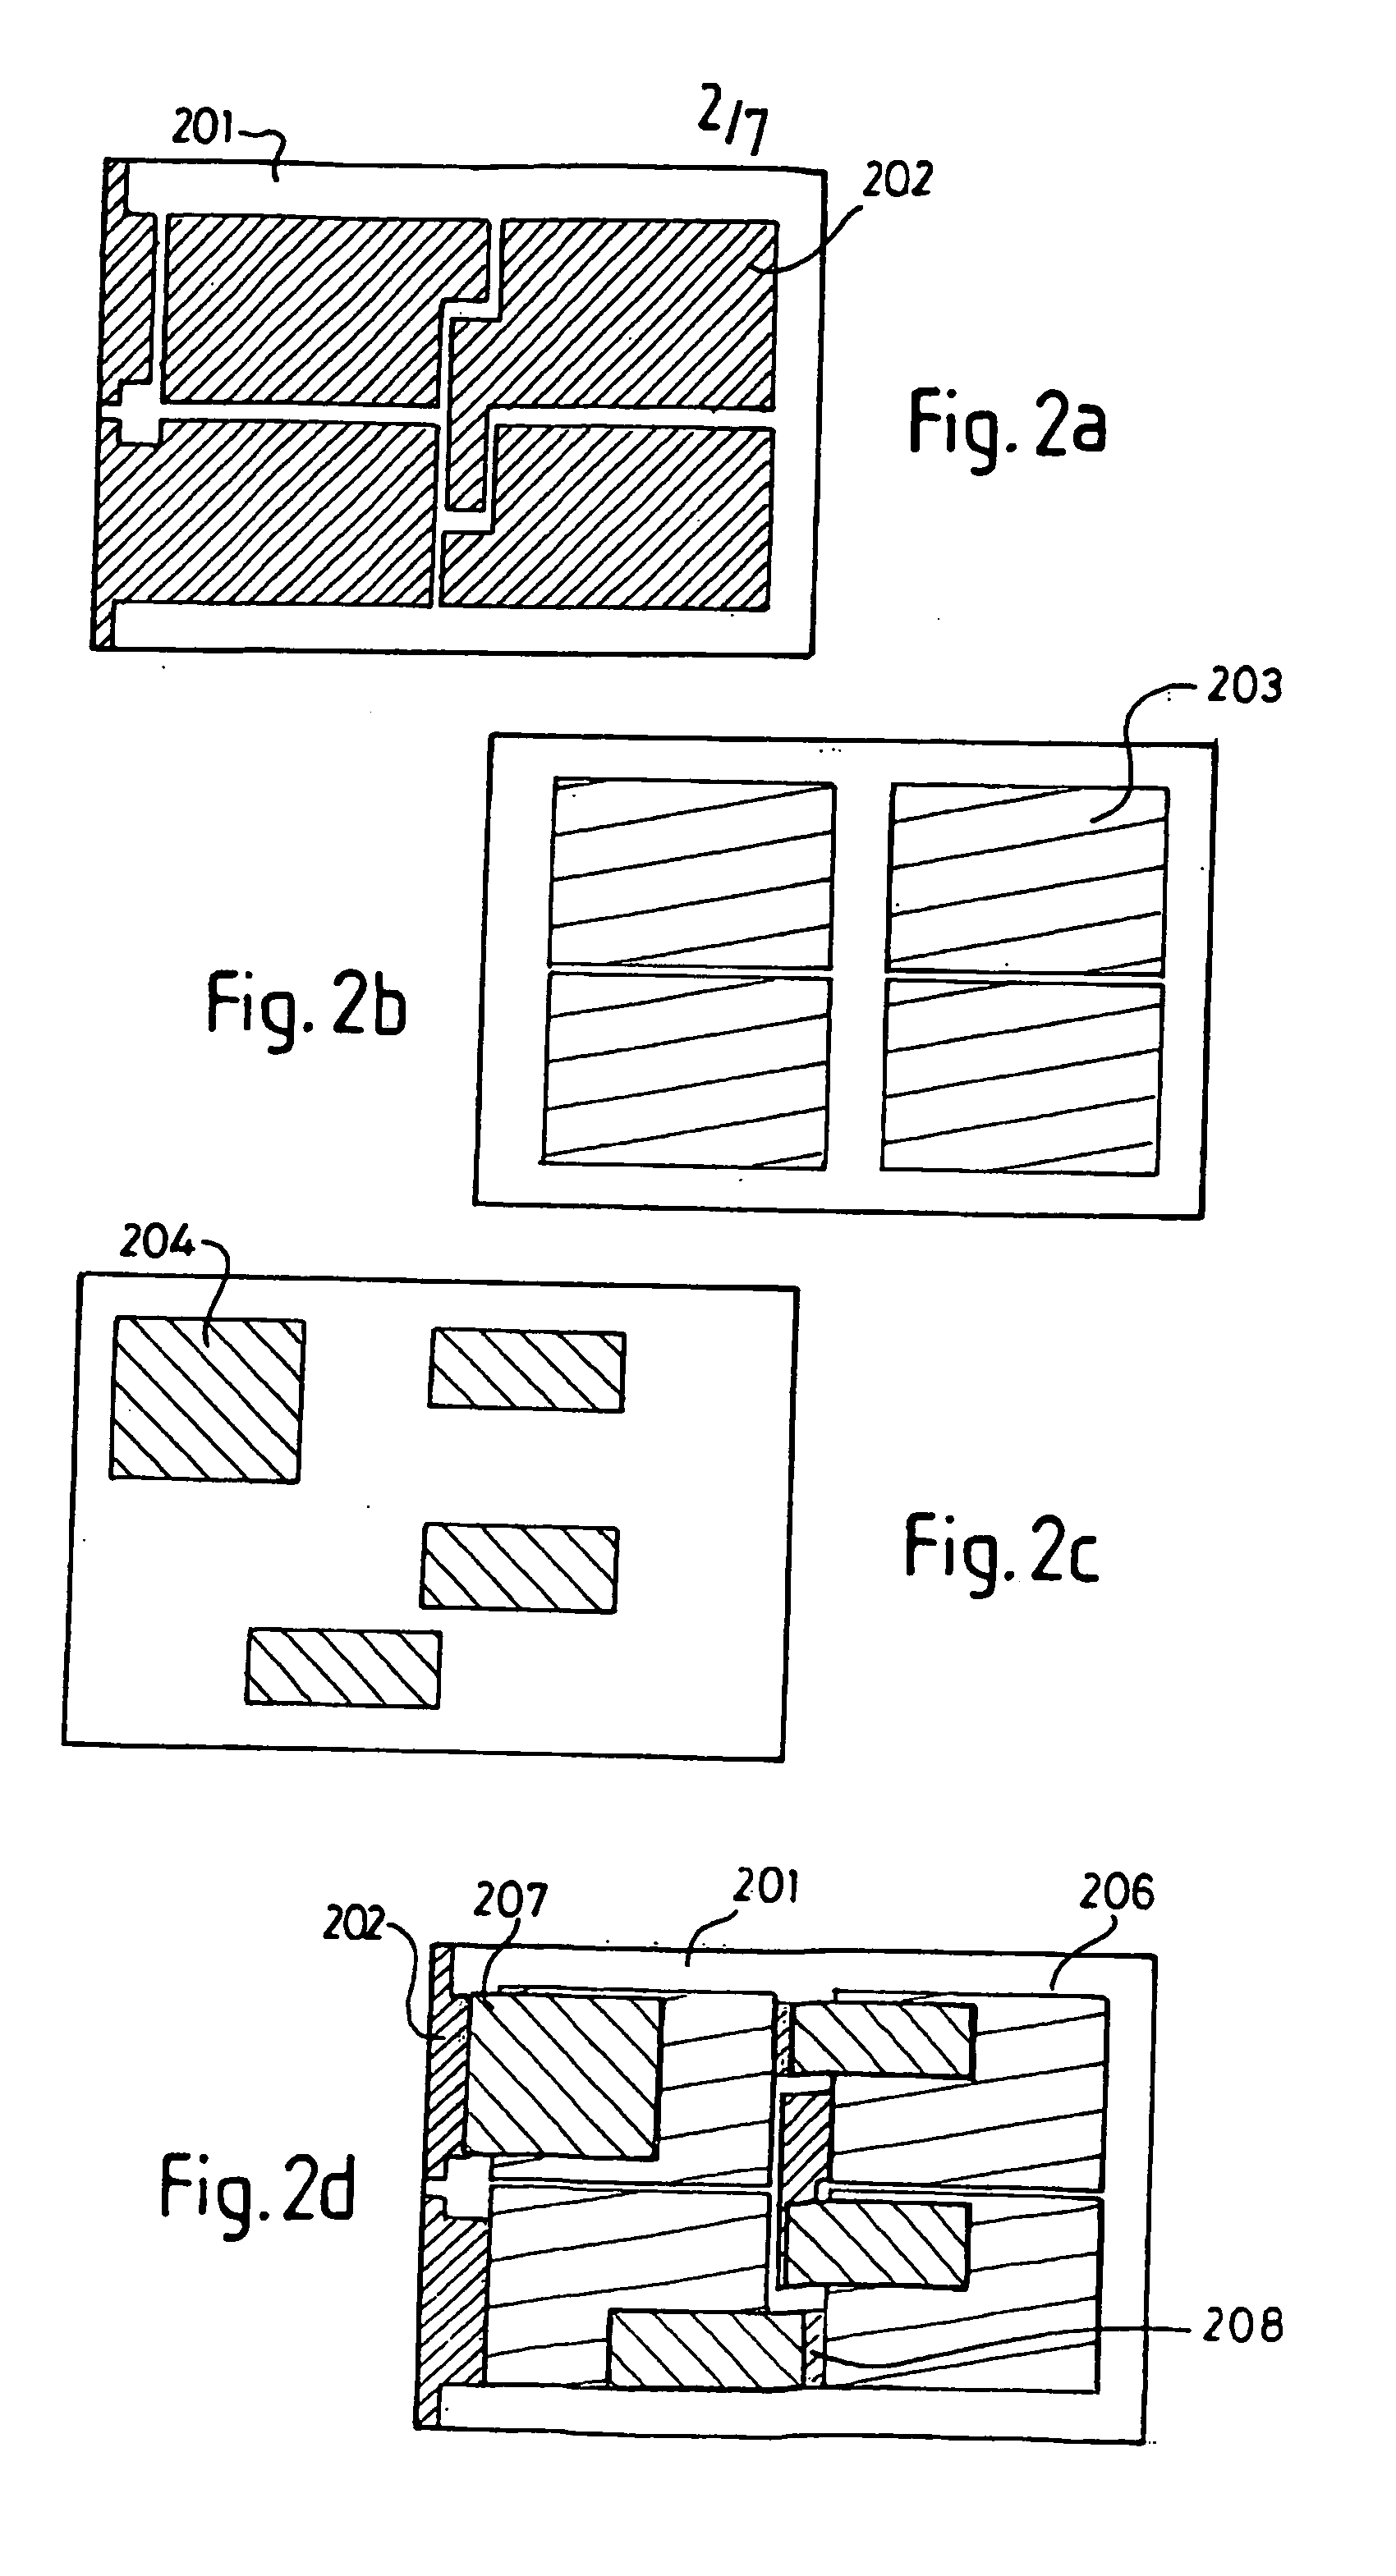 Electrical connection of optoelectronic devices